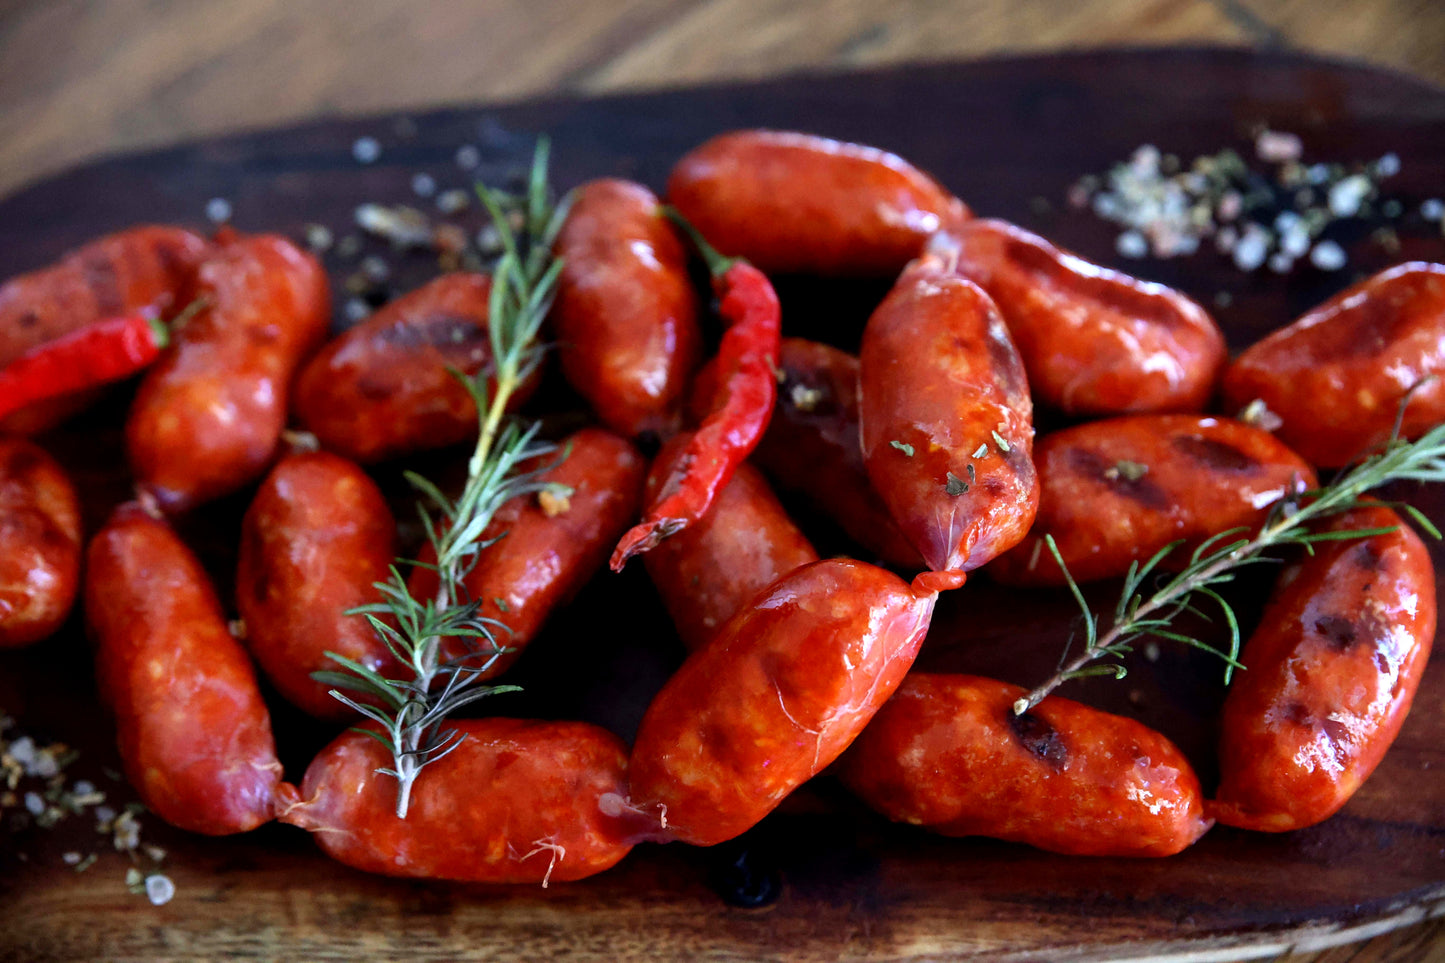 HOT Artisan Traditional Chorizo 4 piece pack random weight approx 400g packet. Regular price $10.00 AUD [You are guaranteed to receive at least 390g of product, equivalent price of $25.64 per kg.]